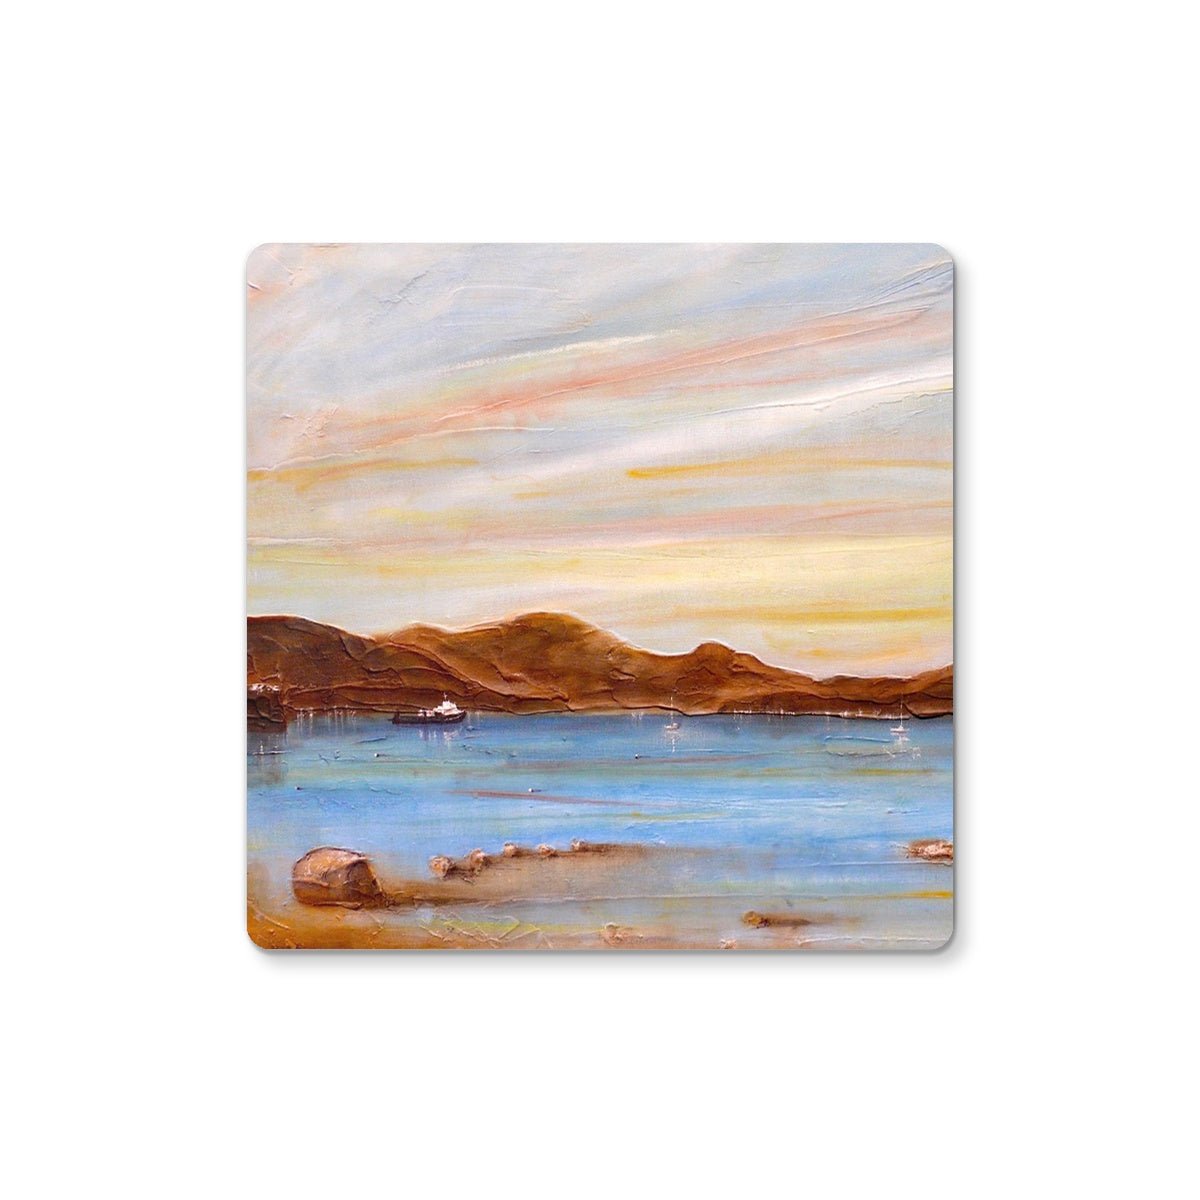 The Last Ferry To Dunoon Art Gifts Coaster-Coasters-River Clyde Art Gallery-Single Coaster-Paintings, Prints, Homeware, Art Gifts From Scotland By Scottish Artist Kevin Hunter